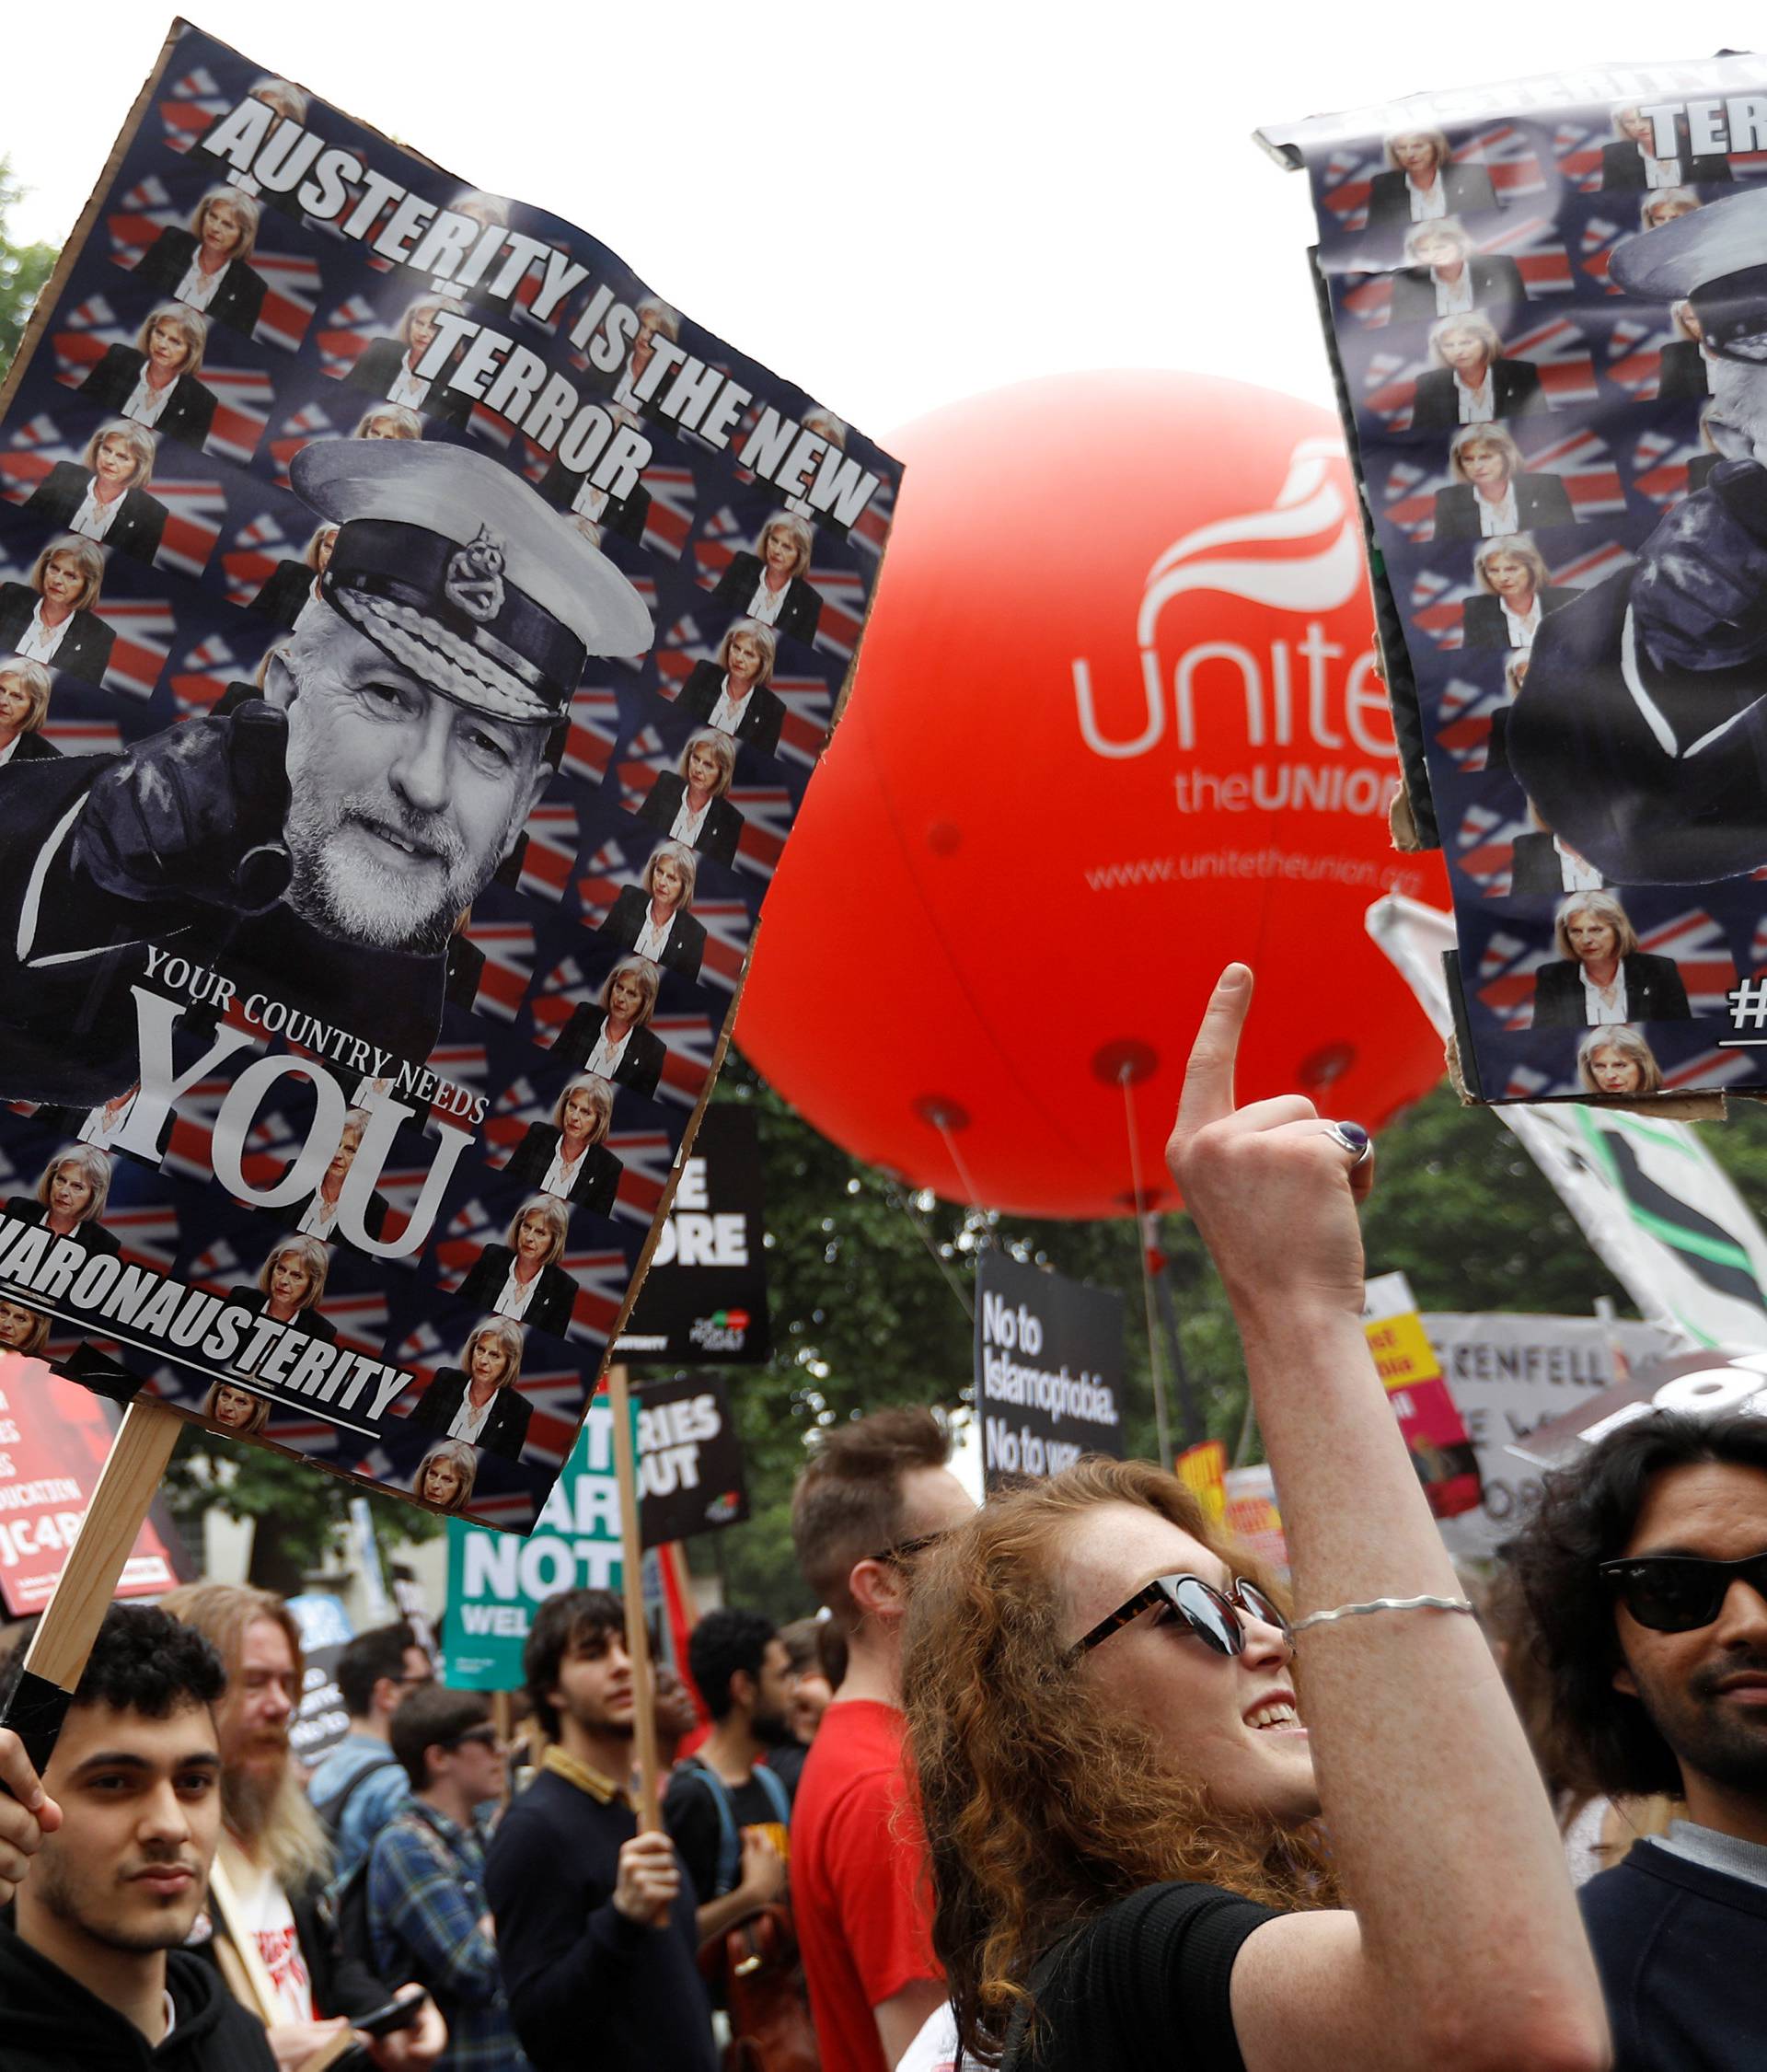 Demonstrators walk towards Parliament Square during an anti-austerity rally and march organised by campaigners Peoples' Assembly, in central London